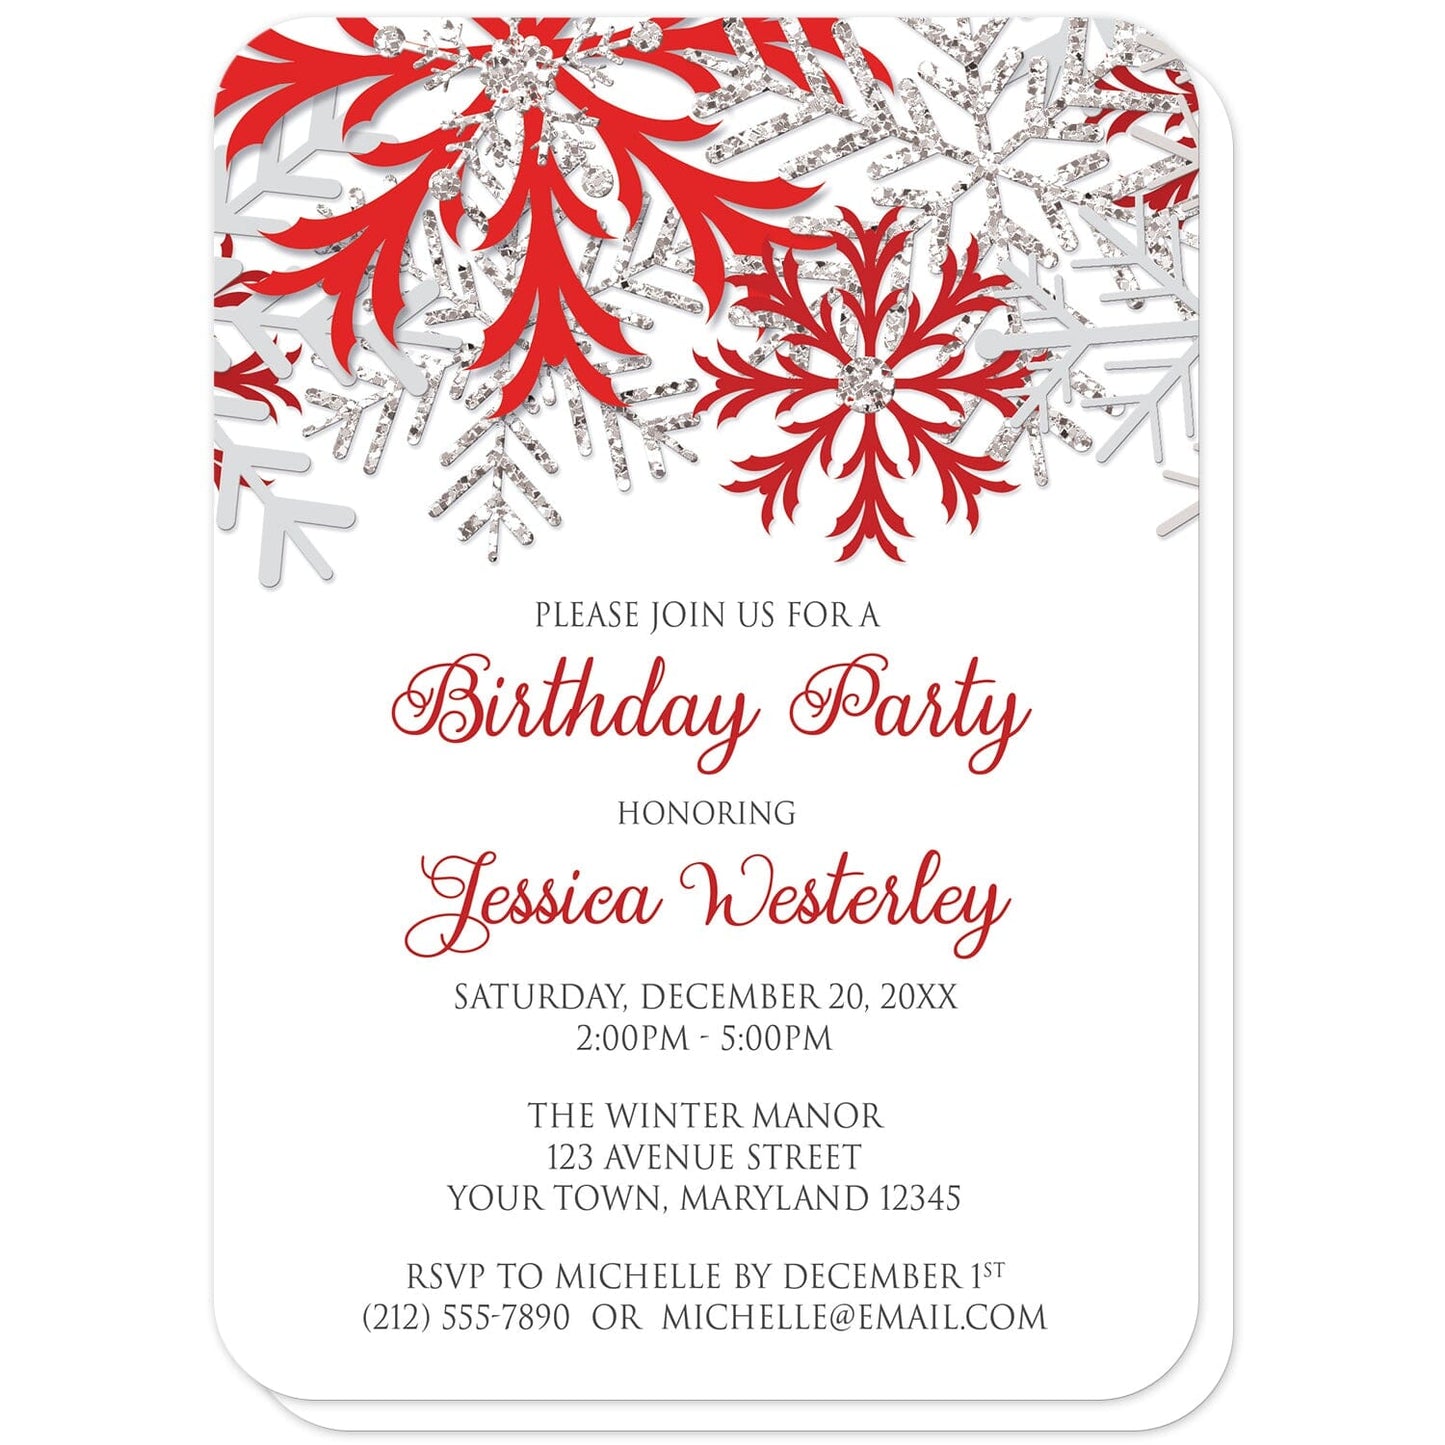 Winter Red Silver Snowflake Birthday Party Invitations (with rounded corners) at Artistically Invited. Beautiful winter red silver snowflake birthday party invitations designed with red, darker red, silver-colored glitter-illustrated, and light gray snowflakes along the top over a white background. Your personalized birthday celebration details are custom printed in red and gray below the pretty snowflakes.